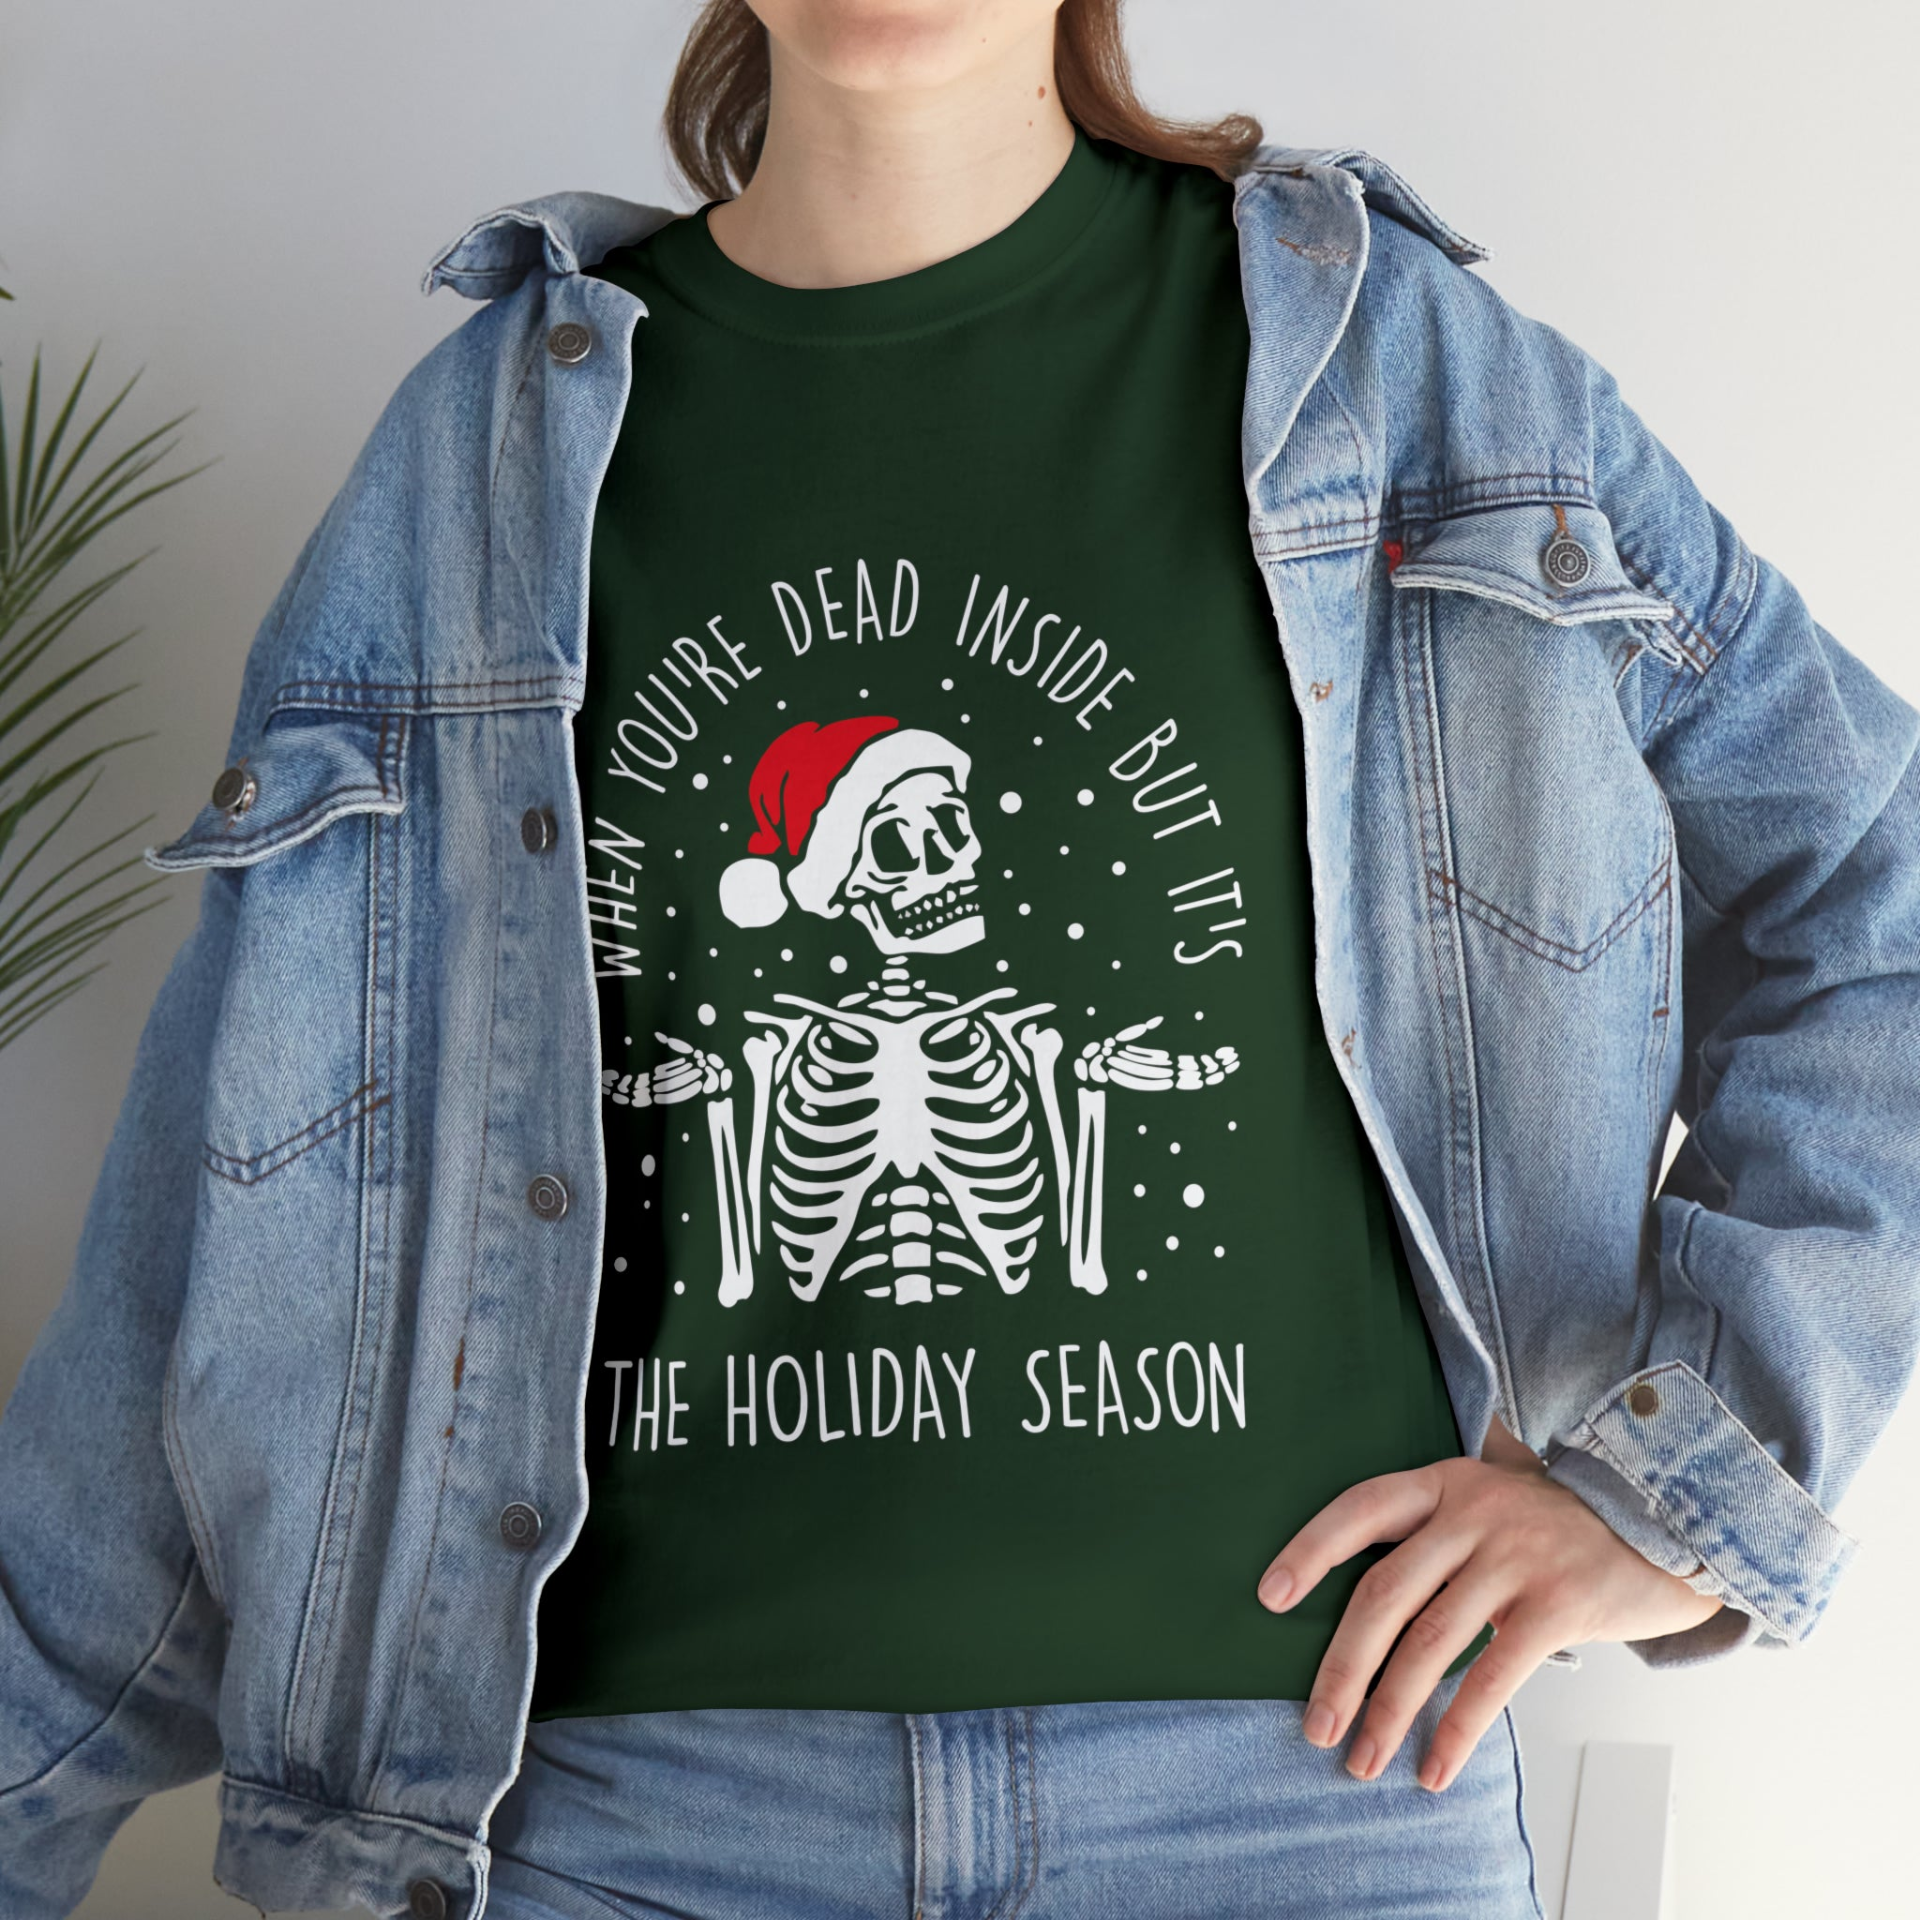 When You're Dead Inside but it's the Holiday Tee, Goodies N Stuff